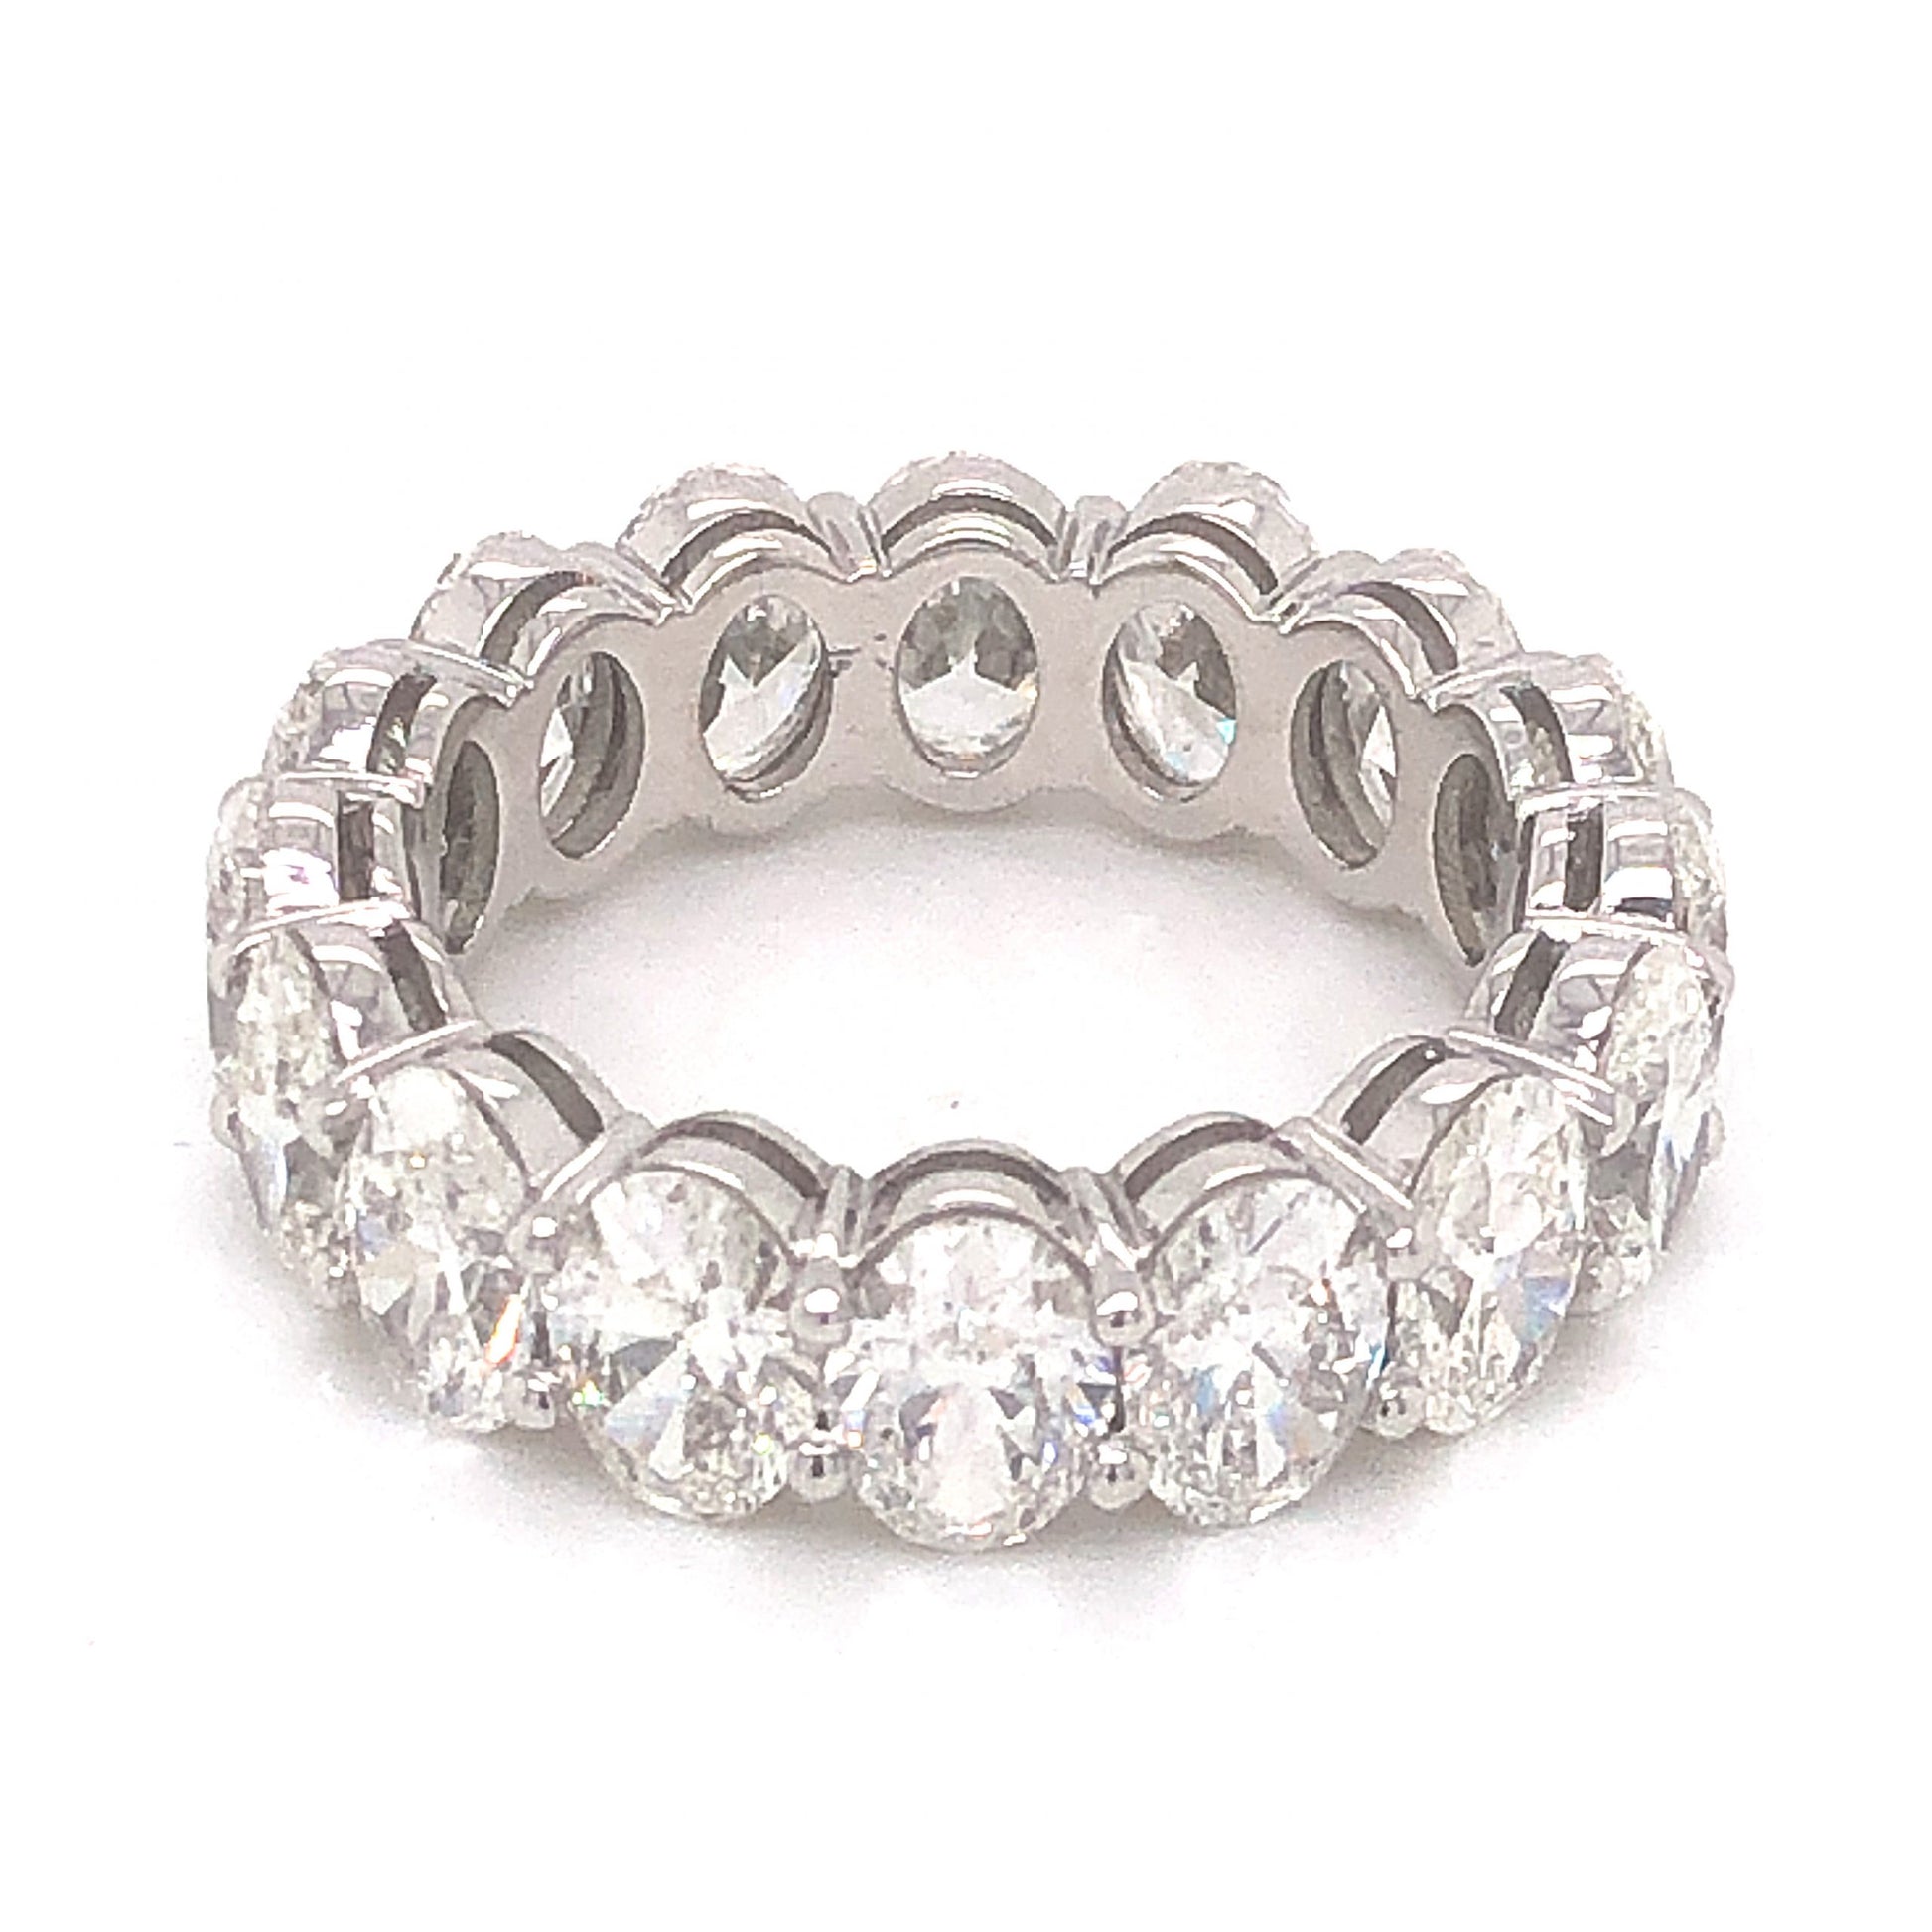 6.43 Oval Cut Diamond Band in 18k White Gold